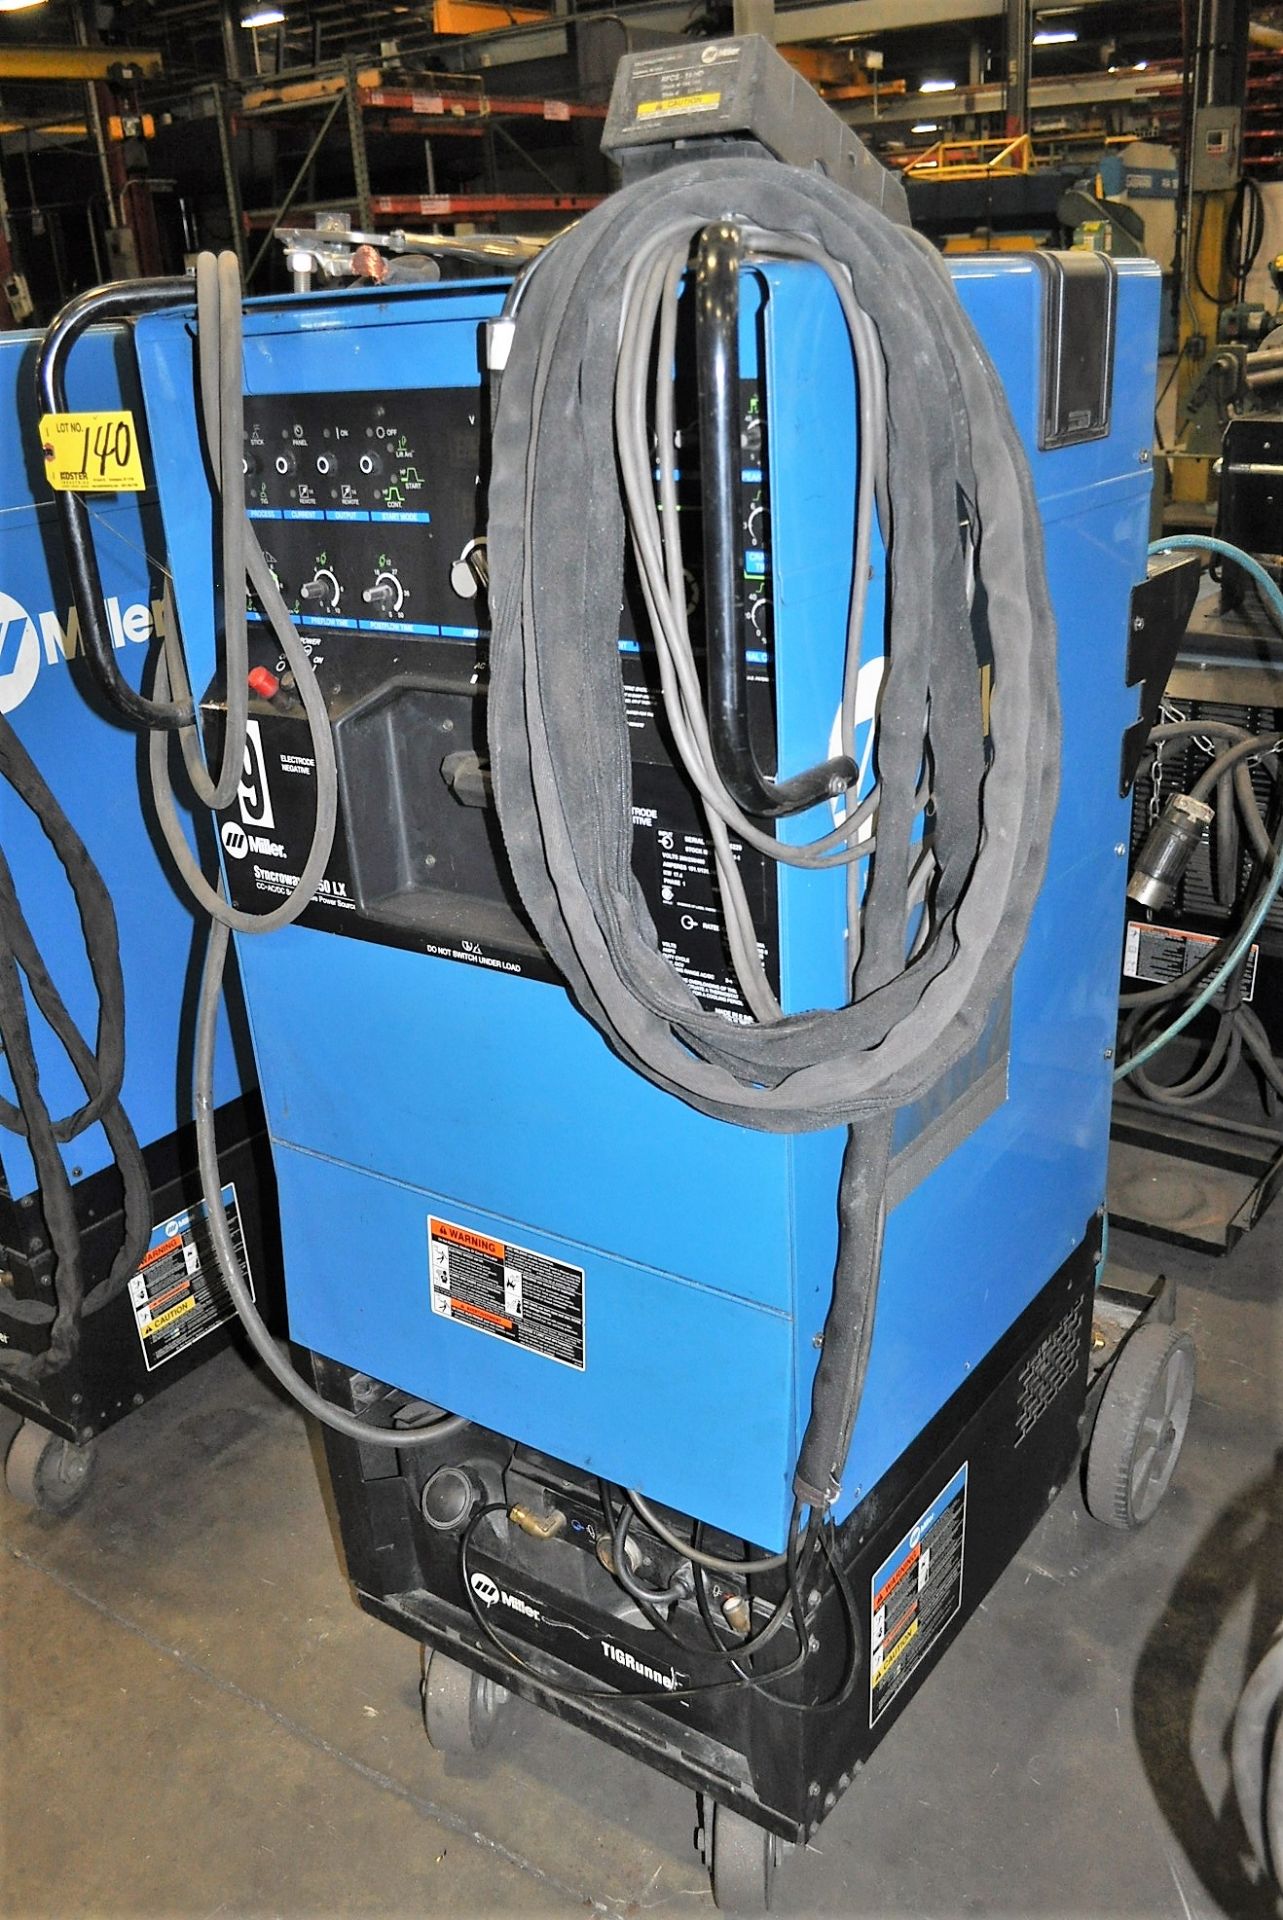 MILLER SYNCROWAVE 350LX 300 / 350-AMP CC AC/DC WELDING POWER SOURCE, WITH TIG GUN, TIG RUNNER, - Image 2 of 3